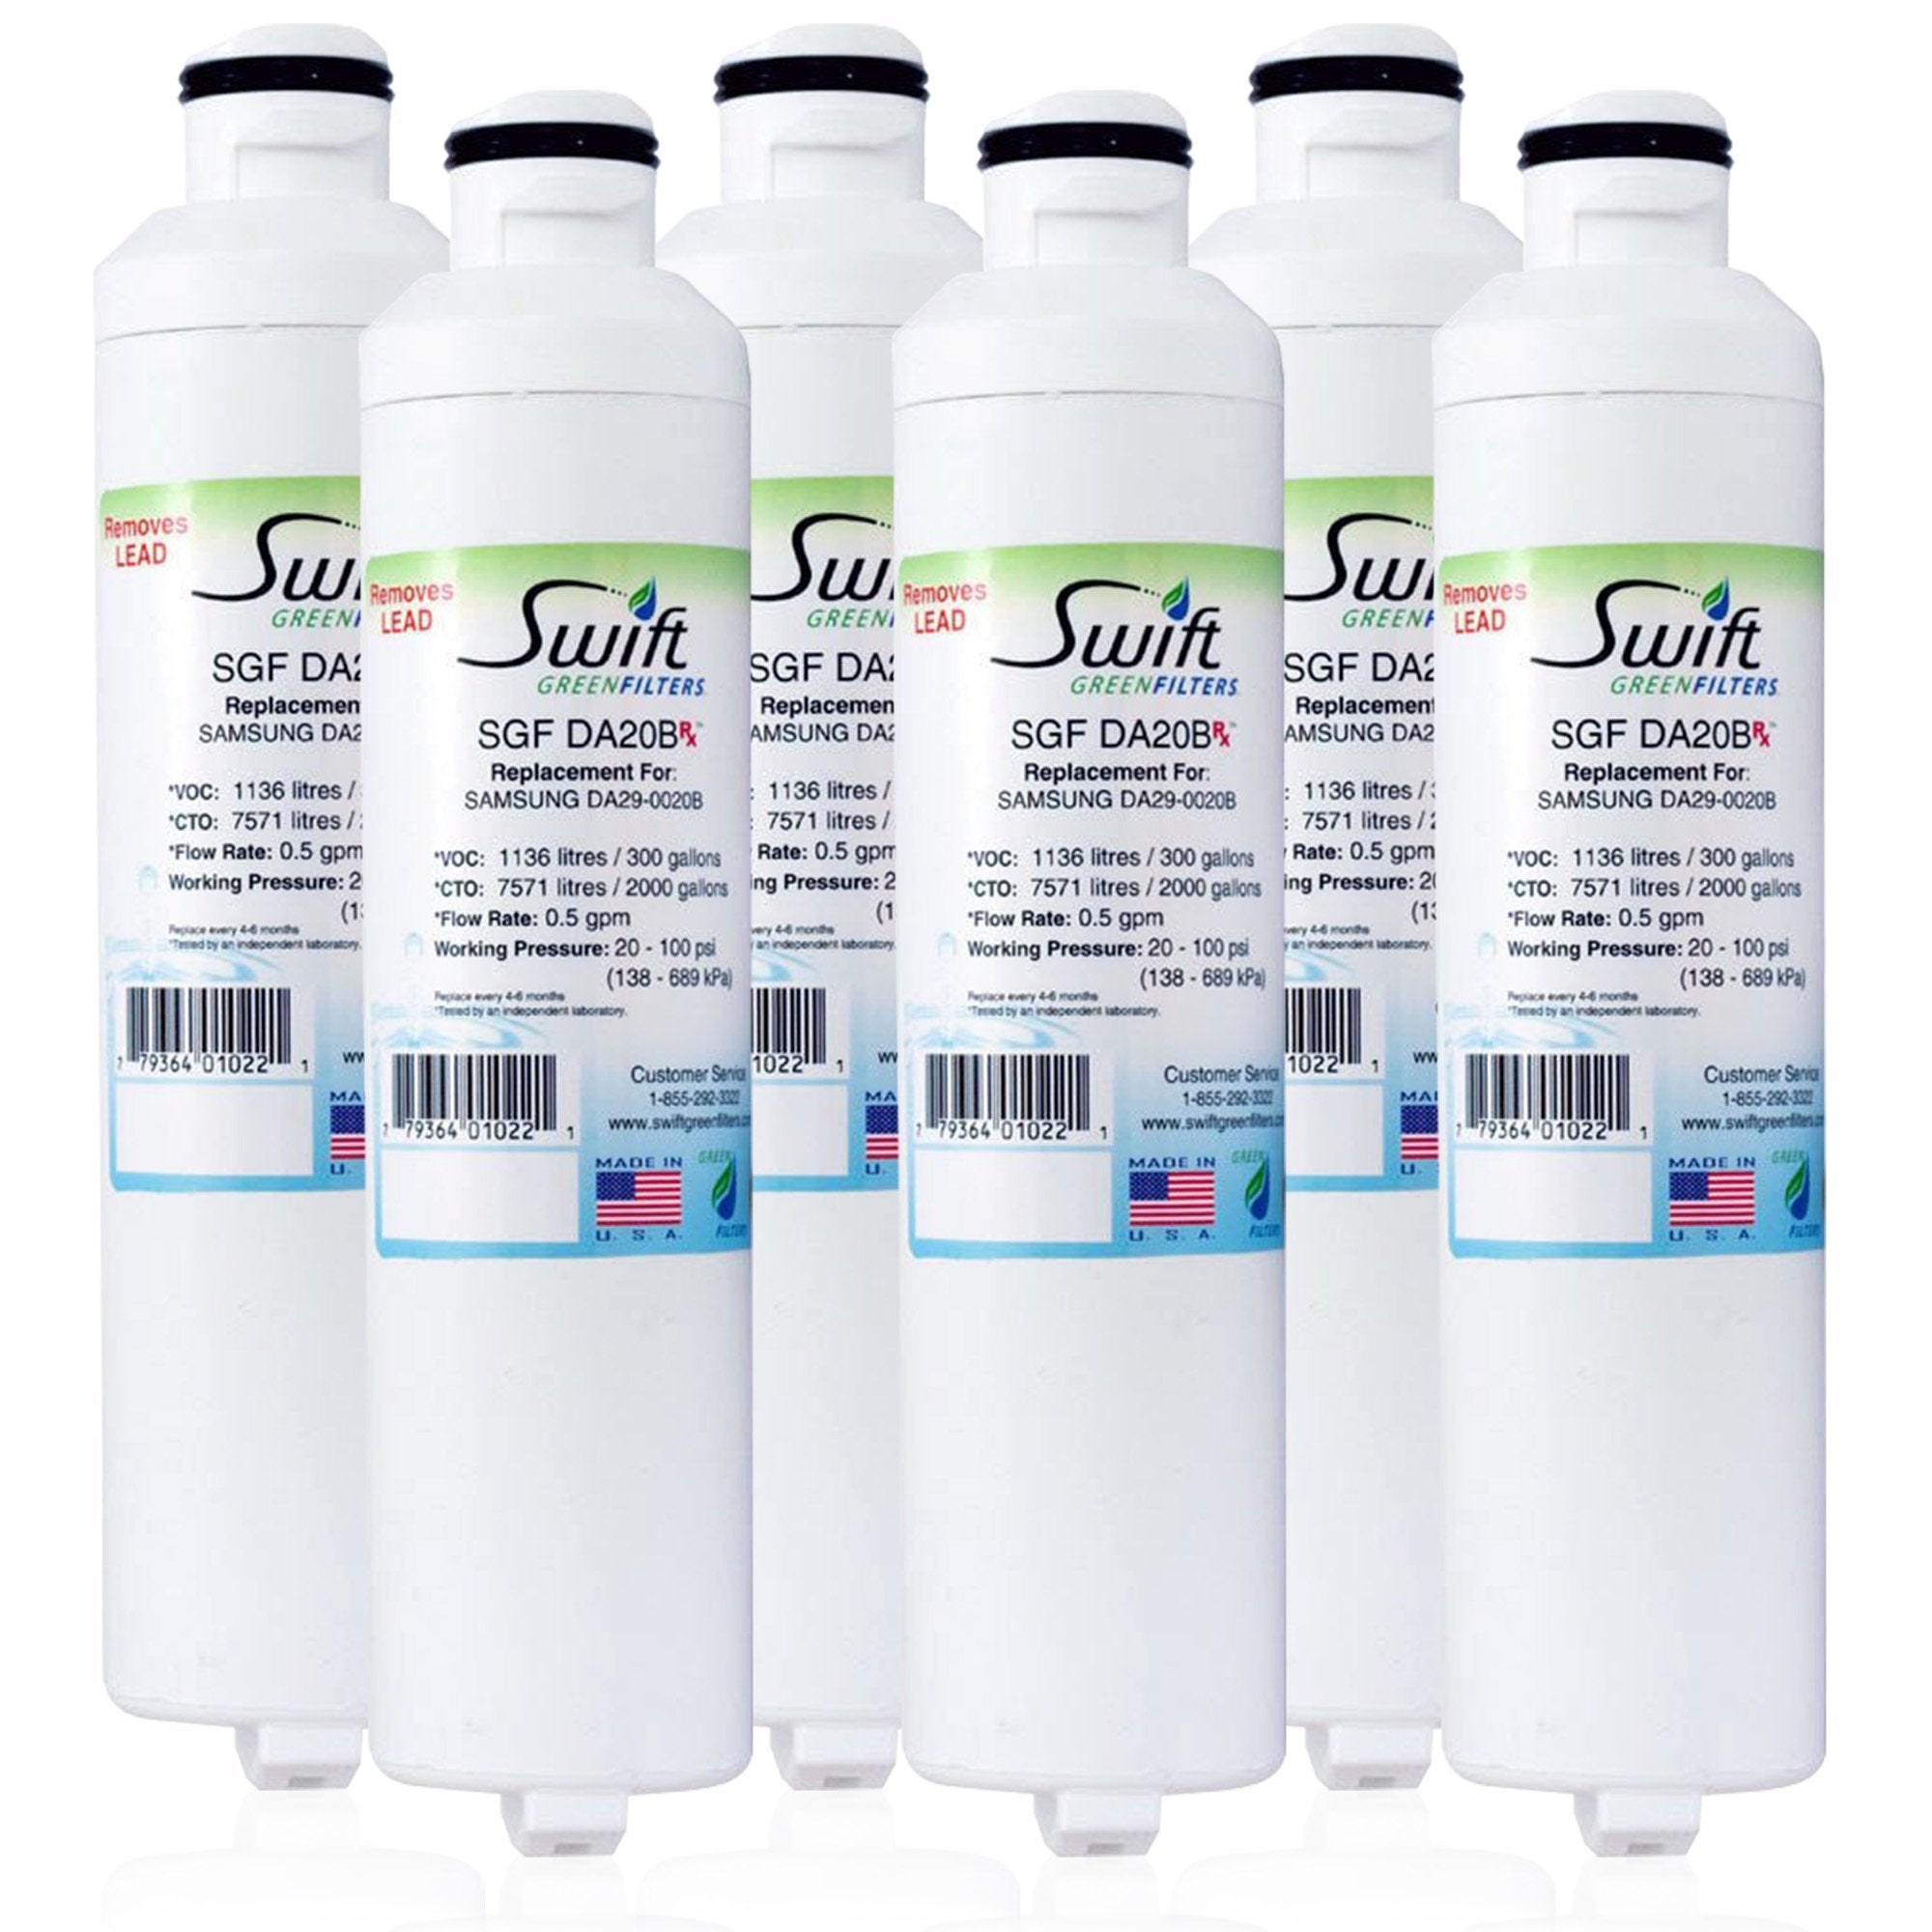 Fisher&Paykel 836848, Supco WF296 & EFF6017 Compatible Pharmaceutical Refrigerator Water Filter 6 pack